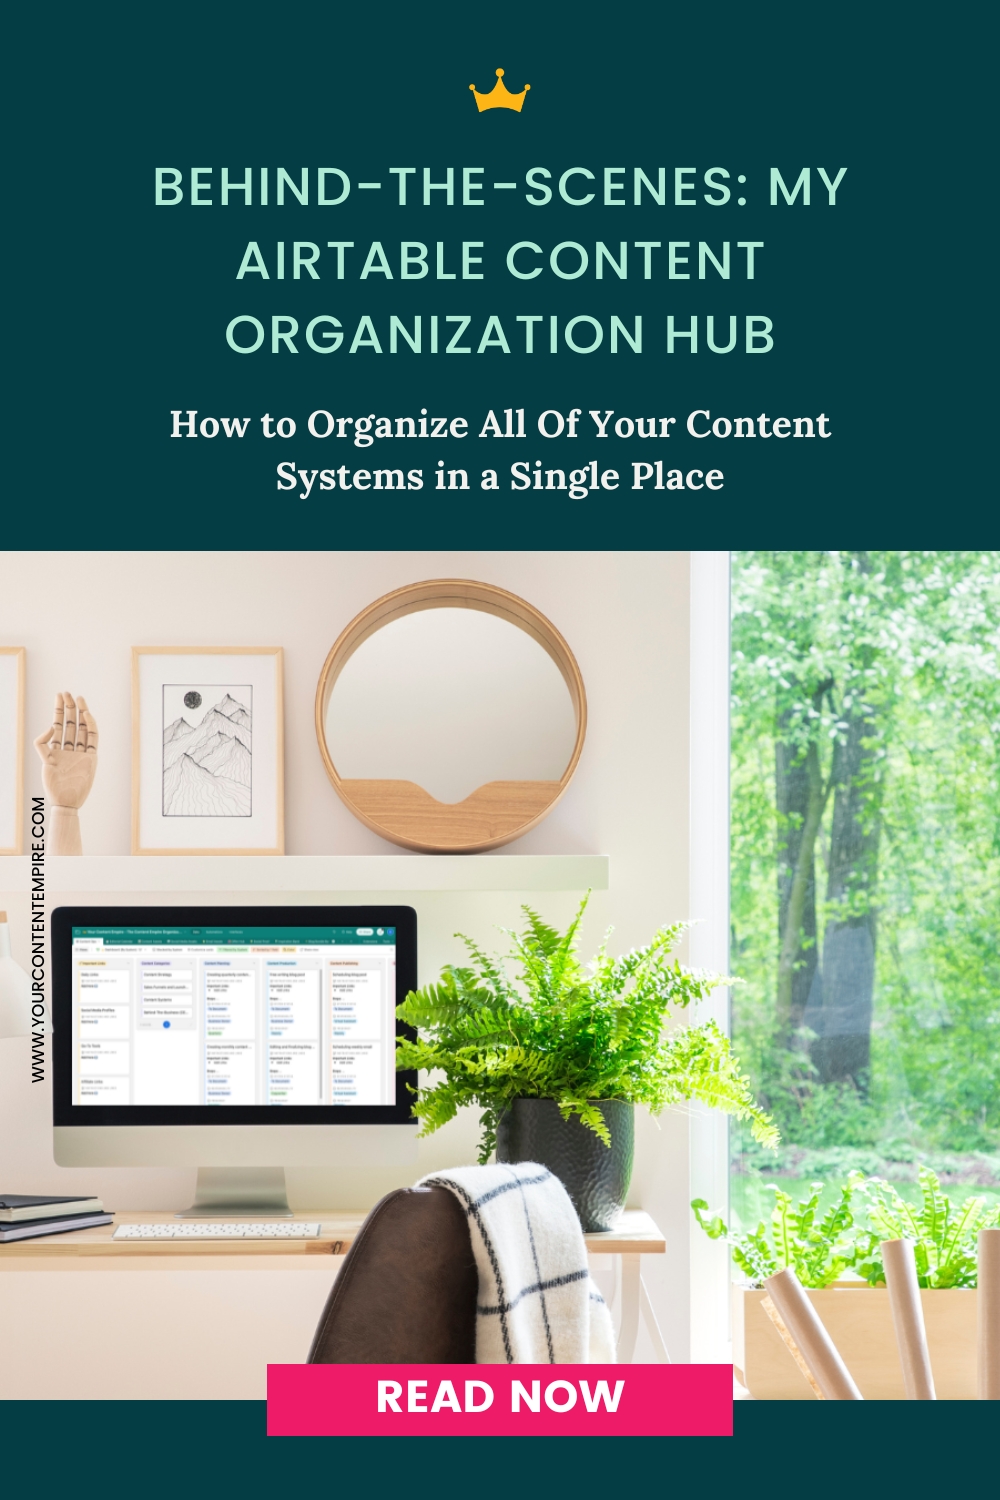 Your Content Empire - Behind-The-Scenes: My Airtable Content Organization Hub